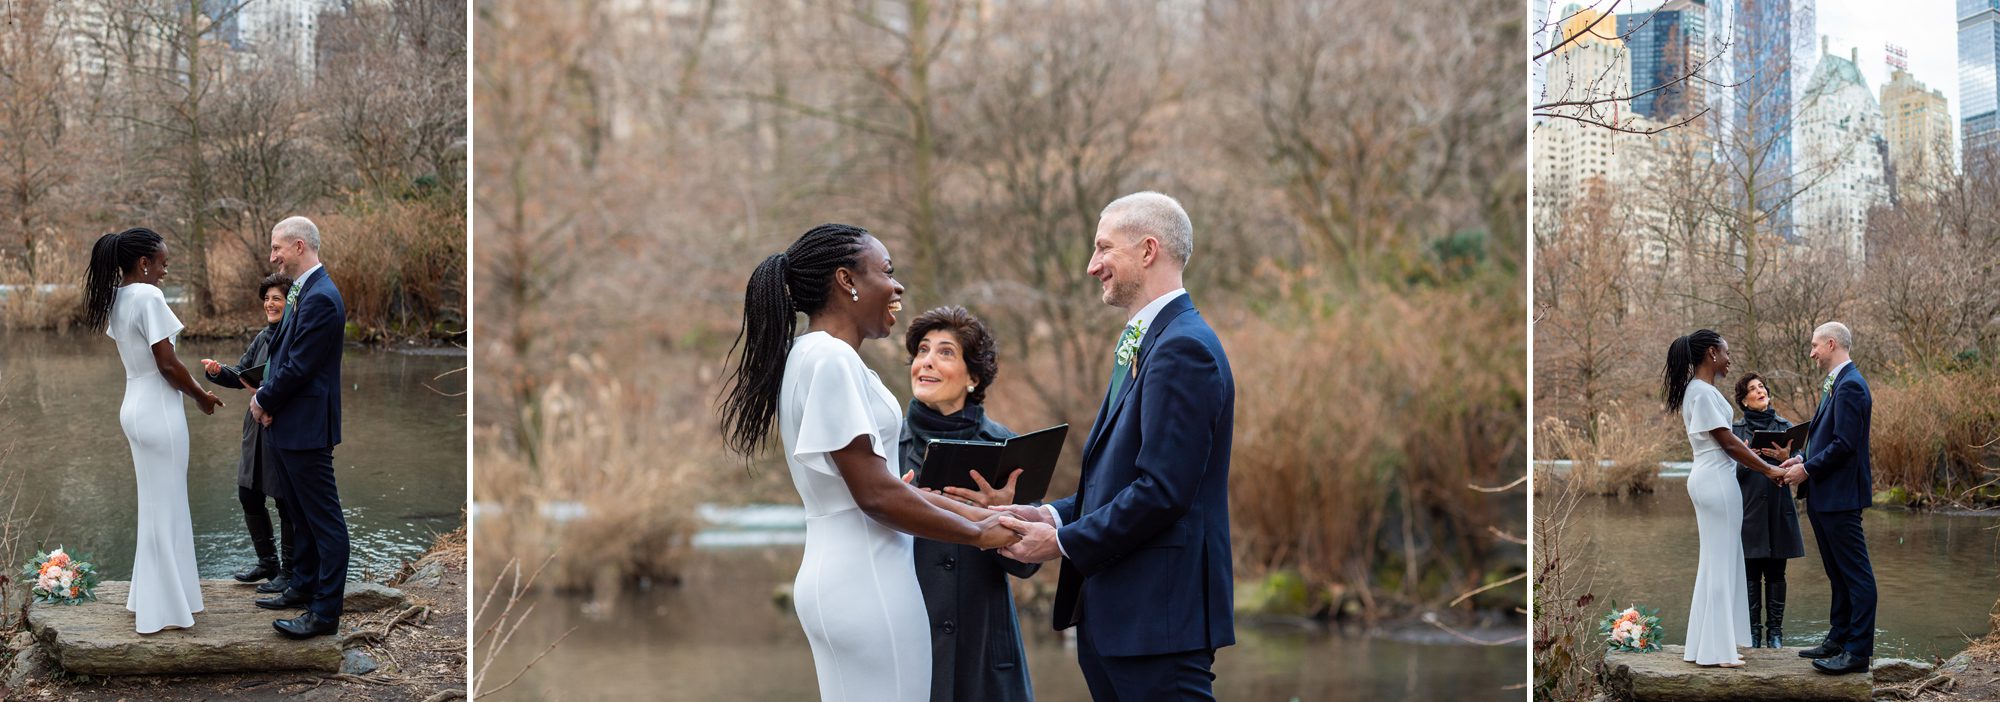 Winter Elopement in Central Park Without Snow